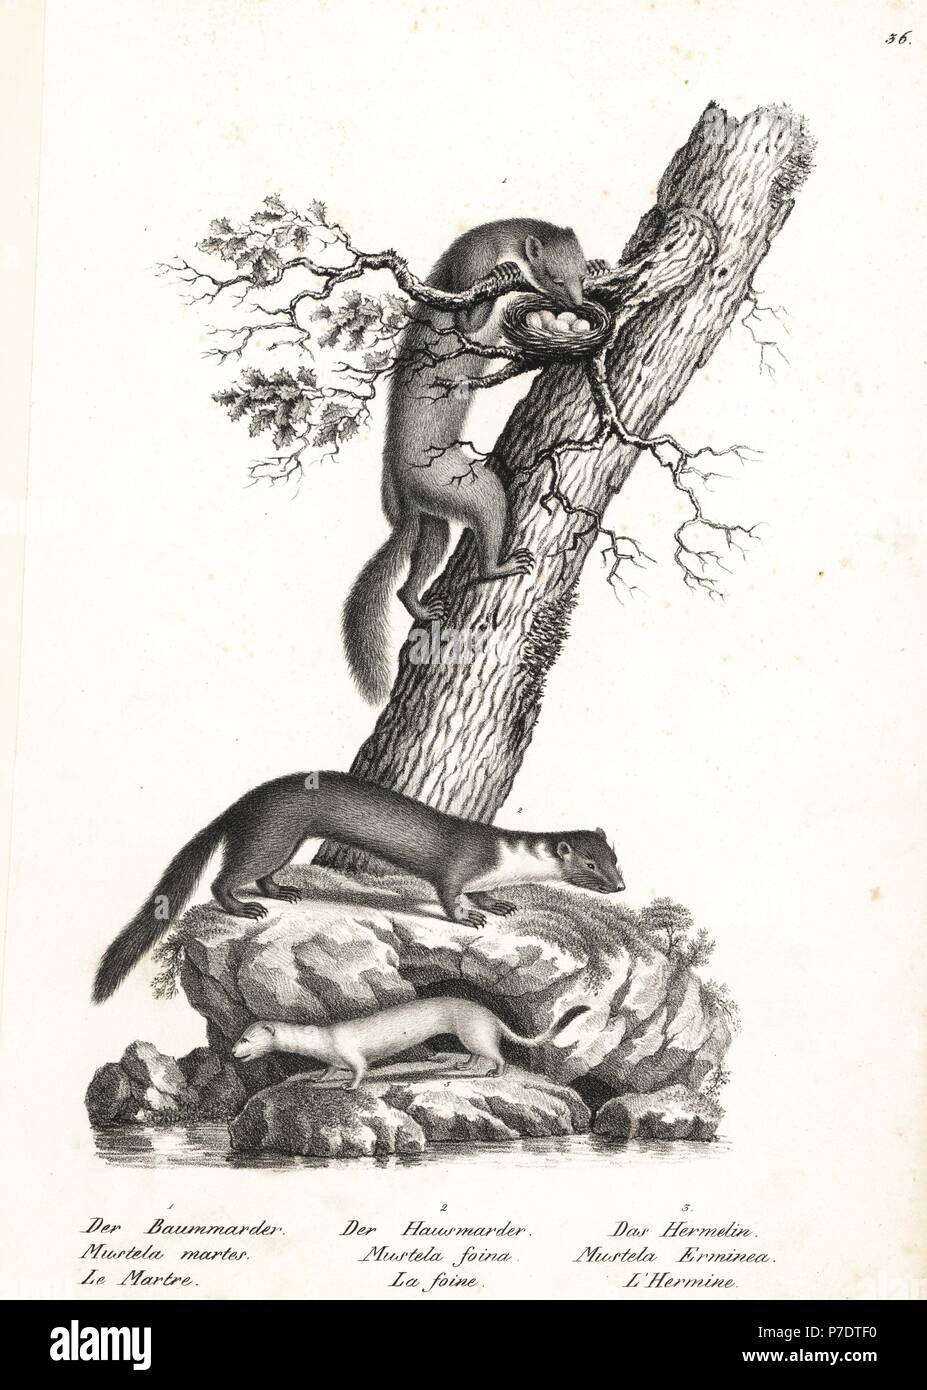 Marten, Martes martes 1, beech marten, Martes foina 2, and stoat or ermine, Mustela erminea 3. Lithograph by Karl Joseph Brodtmann from Heinrich Rudolf Schinz's Illustrated Natural History of Men and Animals, 1836. Stock Photo